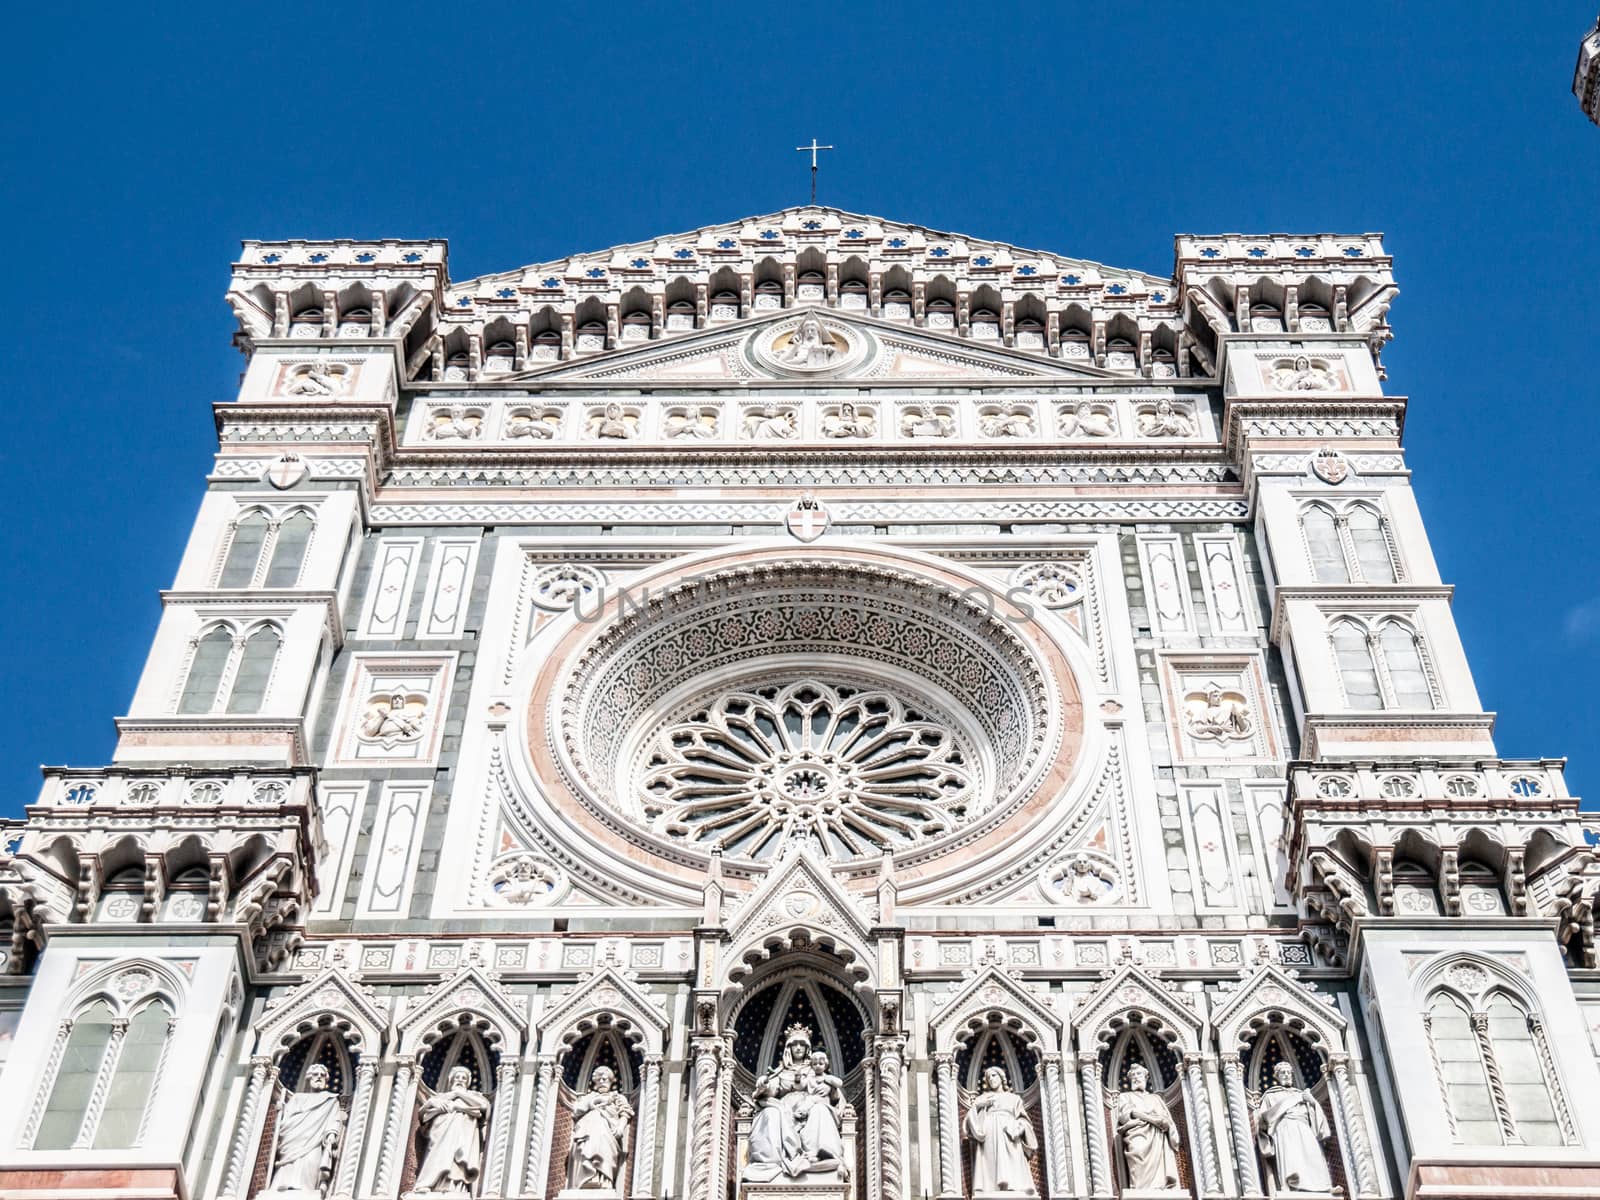 Main portal of Florence Catherdal, Cattedrale di Santa Maria del Fiore or Il Duomo di Firenze, with ornamental mosaic, Firenze, Tuscany, Italy by pyty